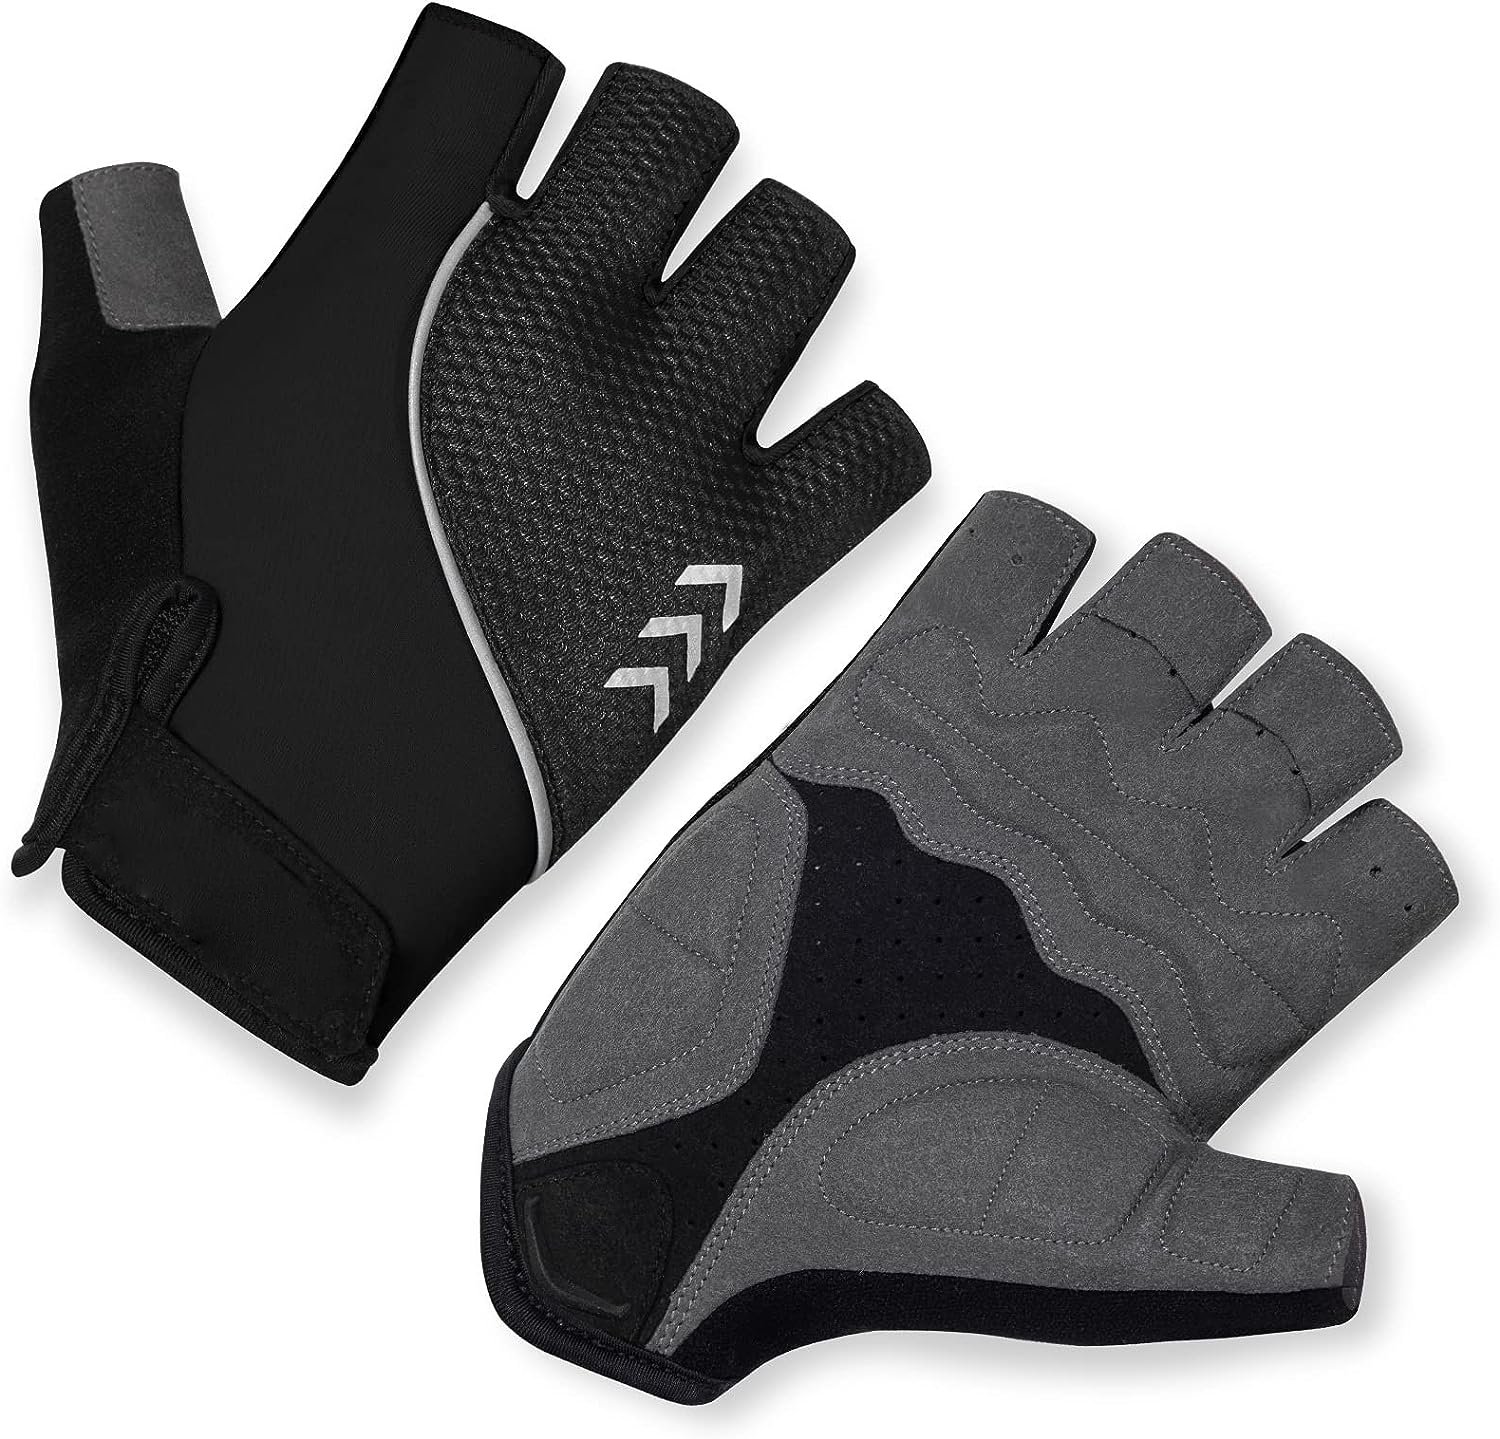 Bike Gloves Cycling Gloves Half Finger Road Riding Gloves with Anti-Slip Shock-Absorbing Pad Biking Bicycle Gloves for Men and Women